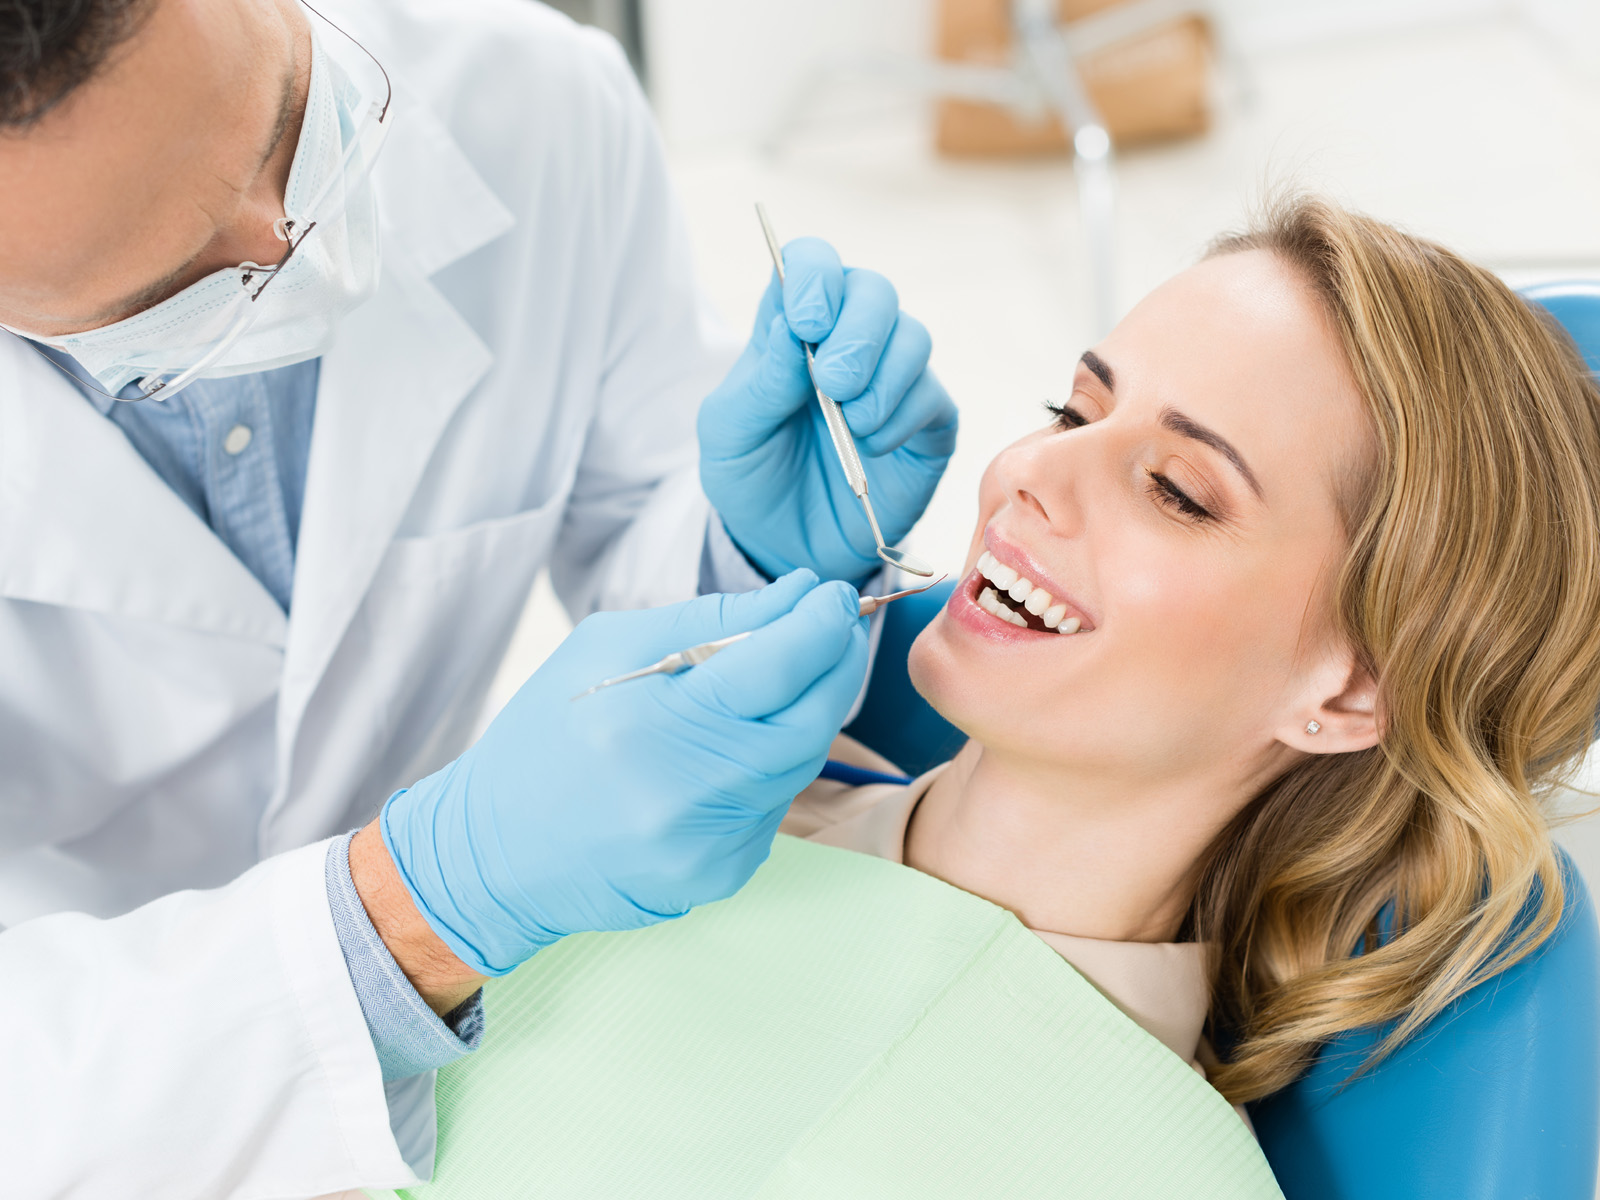 What are symptoms of needing a root canal?